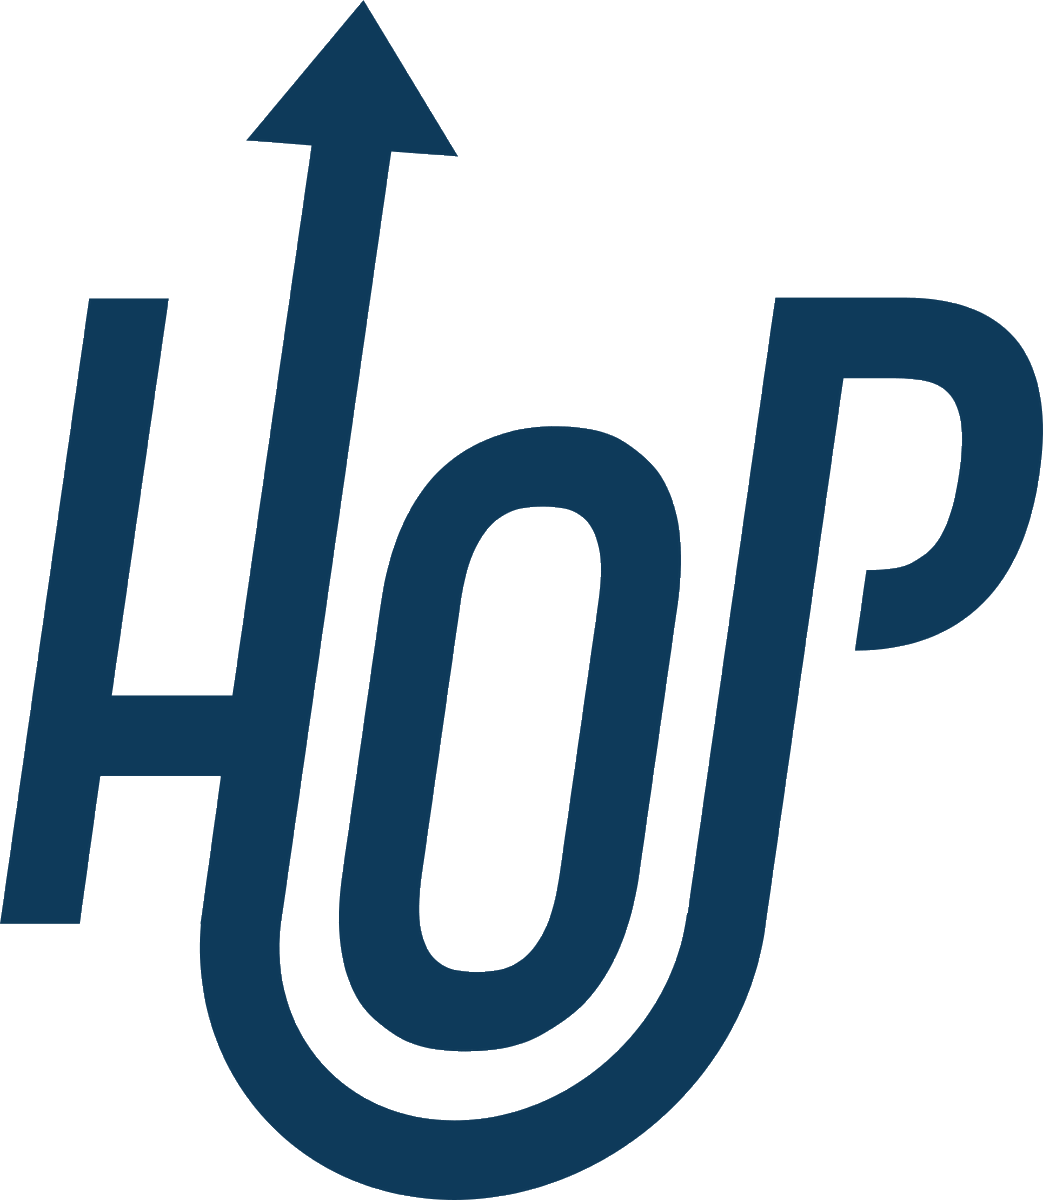 Apache Hop Orchestration Platform (Hop) is an #opensource data integration platform for all aspects of #data and #metadata orchestration. Hop 2.5.0 contains two months of work on 100 tickets, an @ApacheBeam upgrade to 2.48.0, and new how-to guides: bit.ly/3NBGEQS.